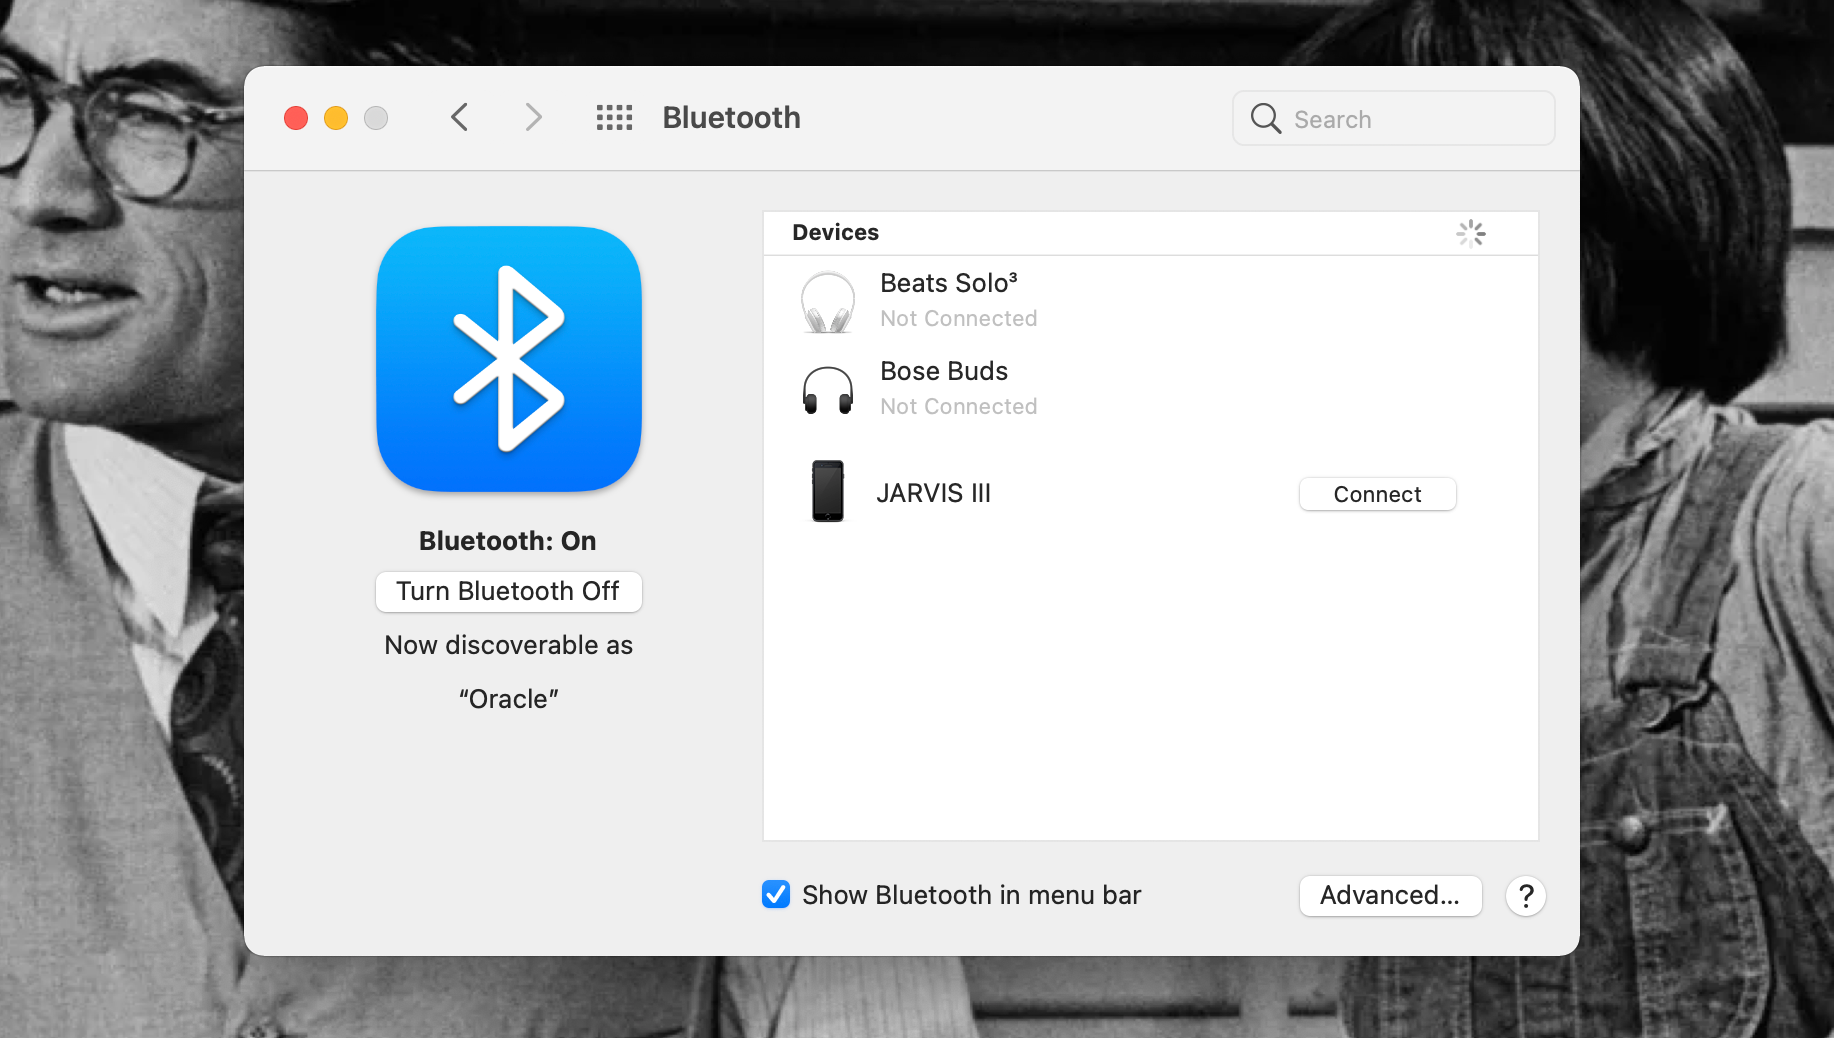 Bluetooth Preferences window open on a MacBook Pro, showing an iPhone is ready to connect